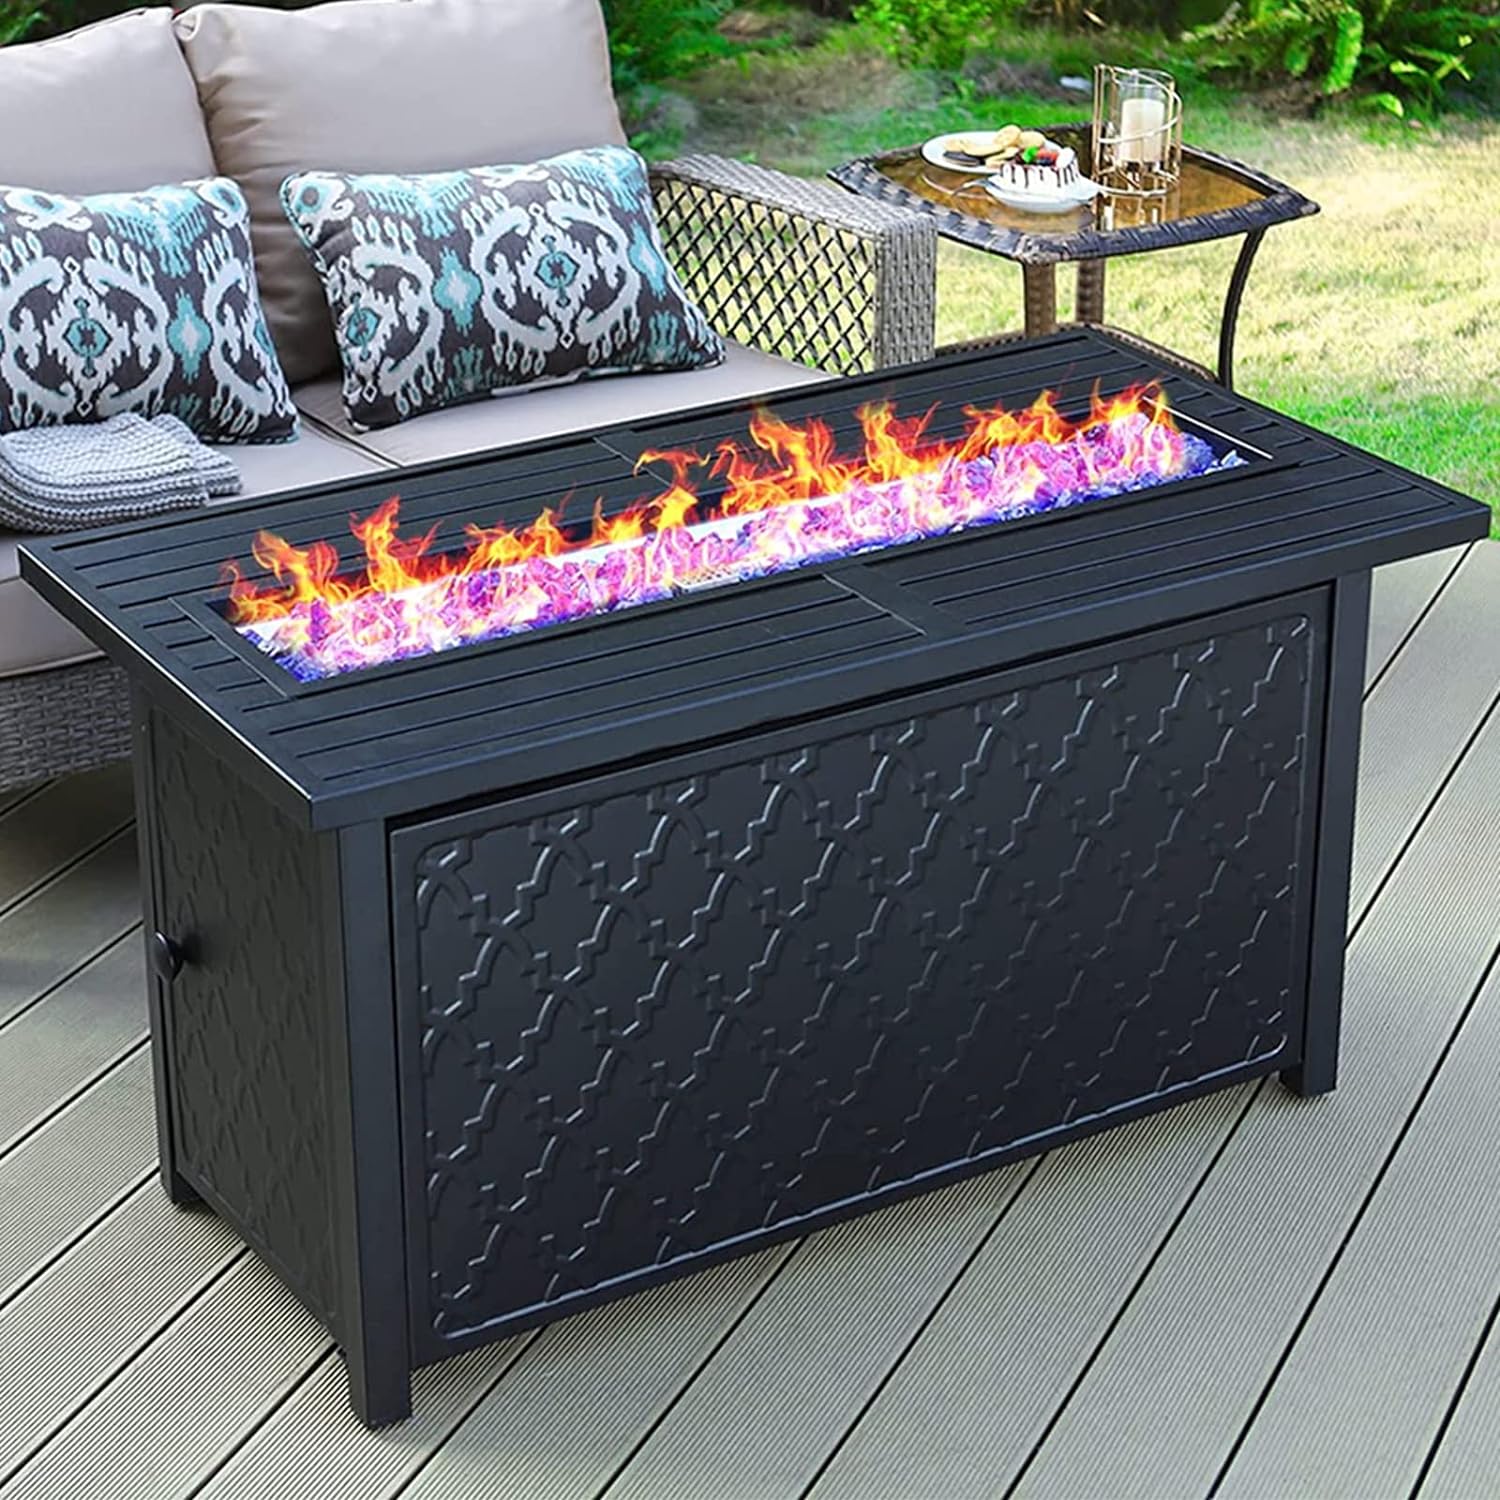 MFSTUDIO 45 Outdoor Rectangular Gas Fire Pit Table50000 BTU Propane Iron Plate Embossing Fire Table with Lid and Blue Glass for Patio,Backyard and Balcony,Black